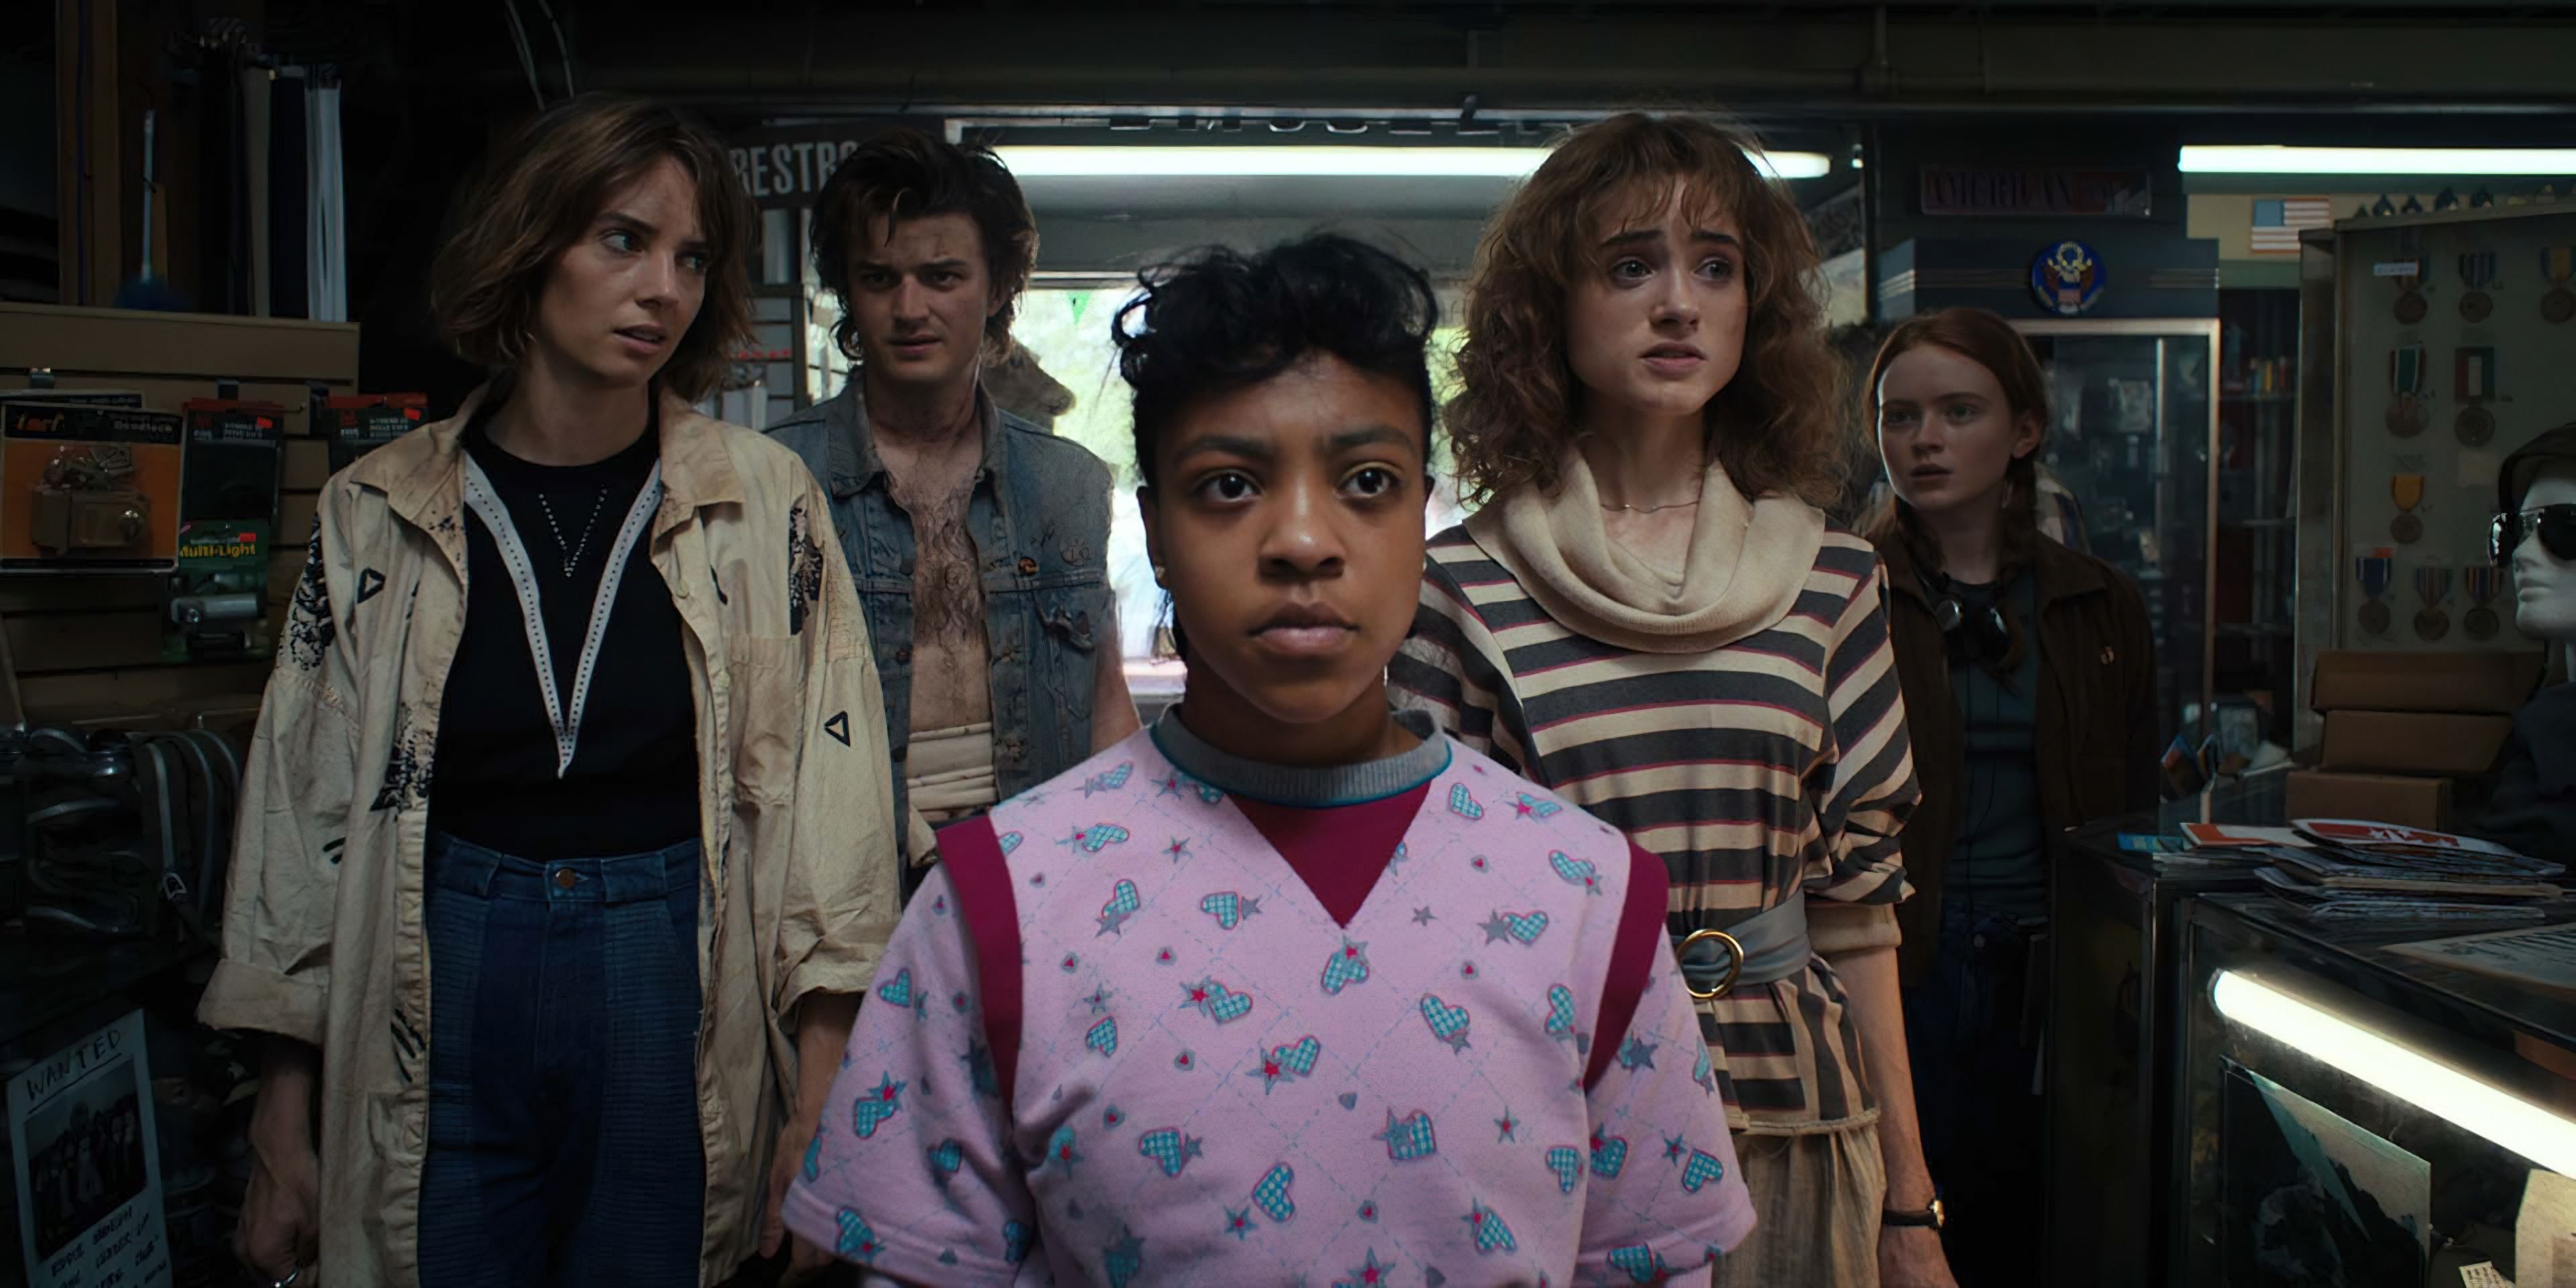 Who Died In Stranger Things? Season 3 Finale, Explained